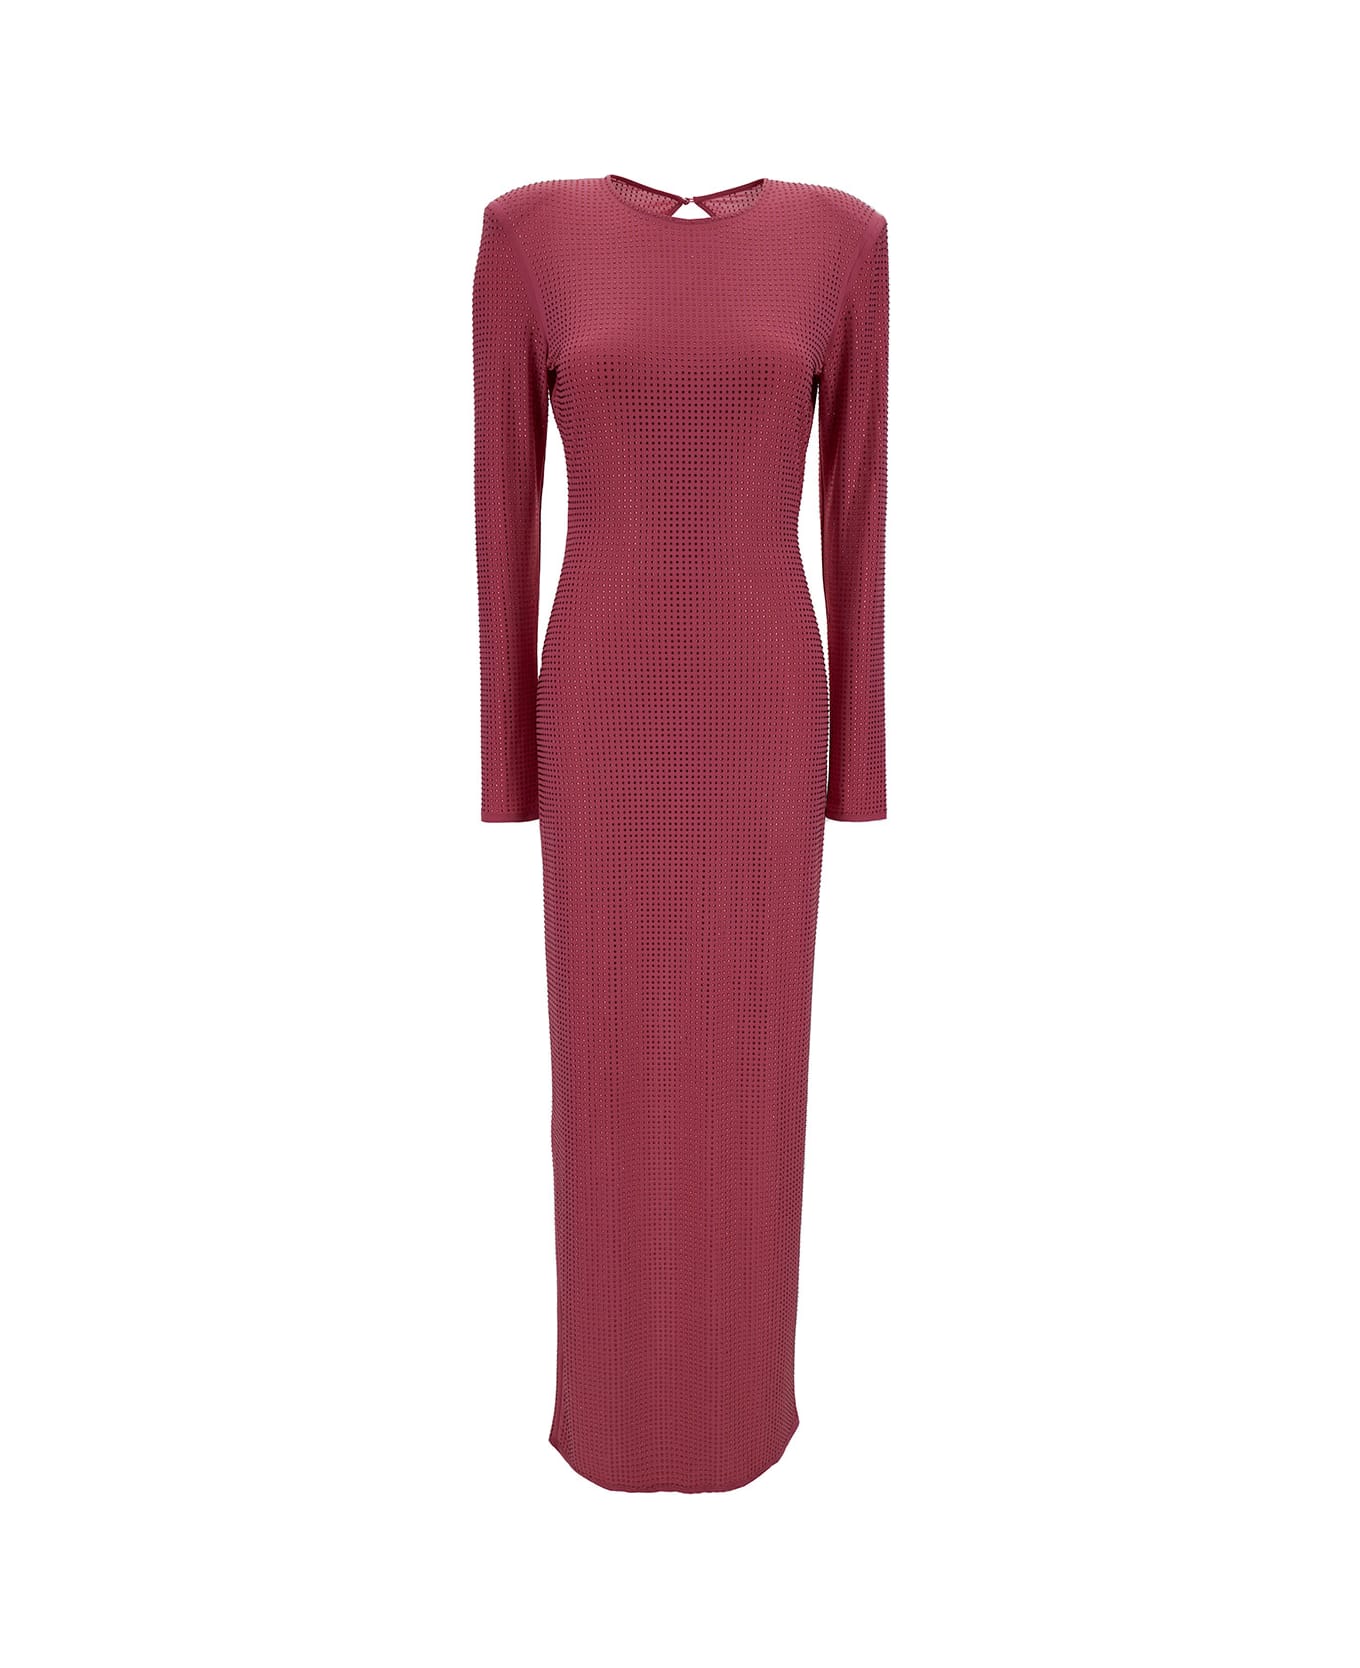 Rotate by Birger Christensen Red Maxi Dress With Rhinestone Embellishment In Stretch Fabric Woman - PINK